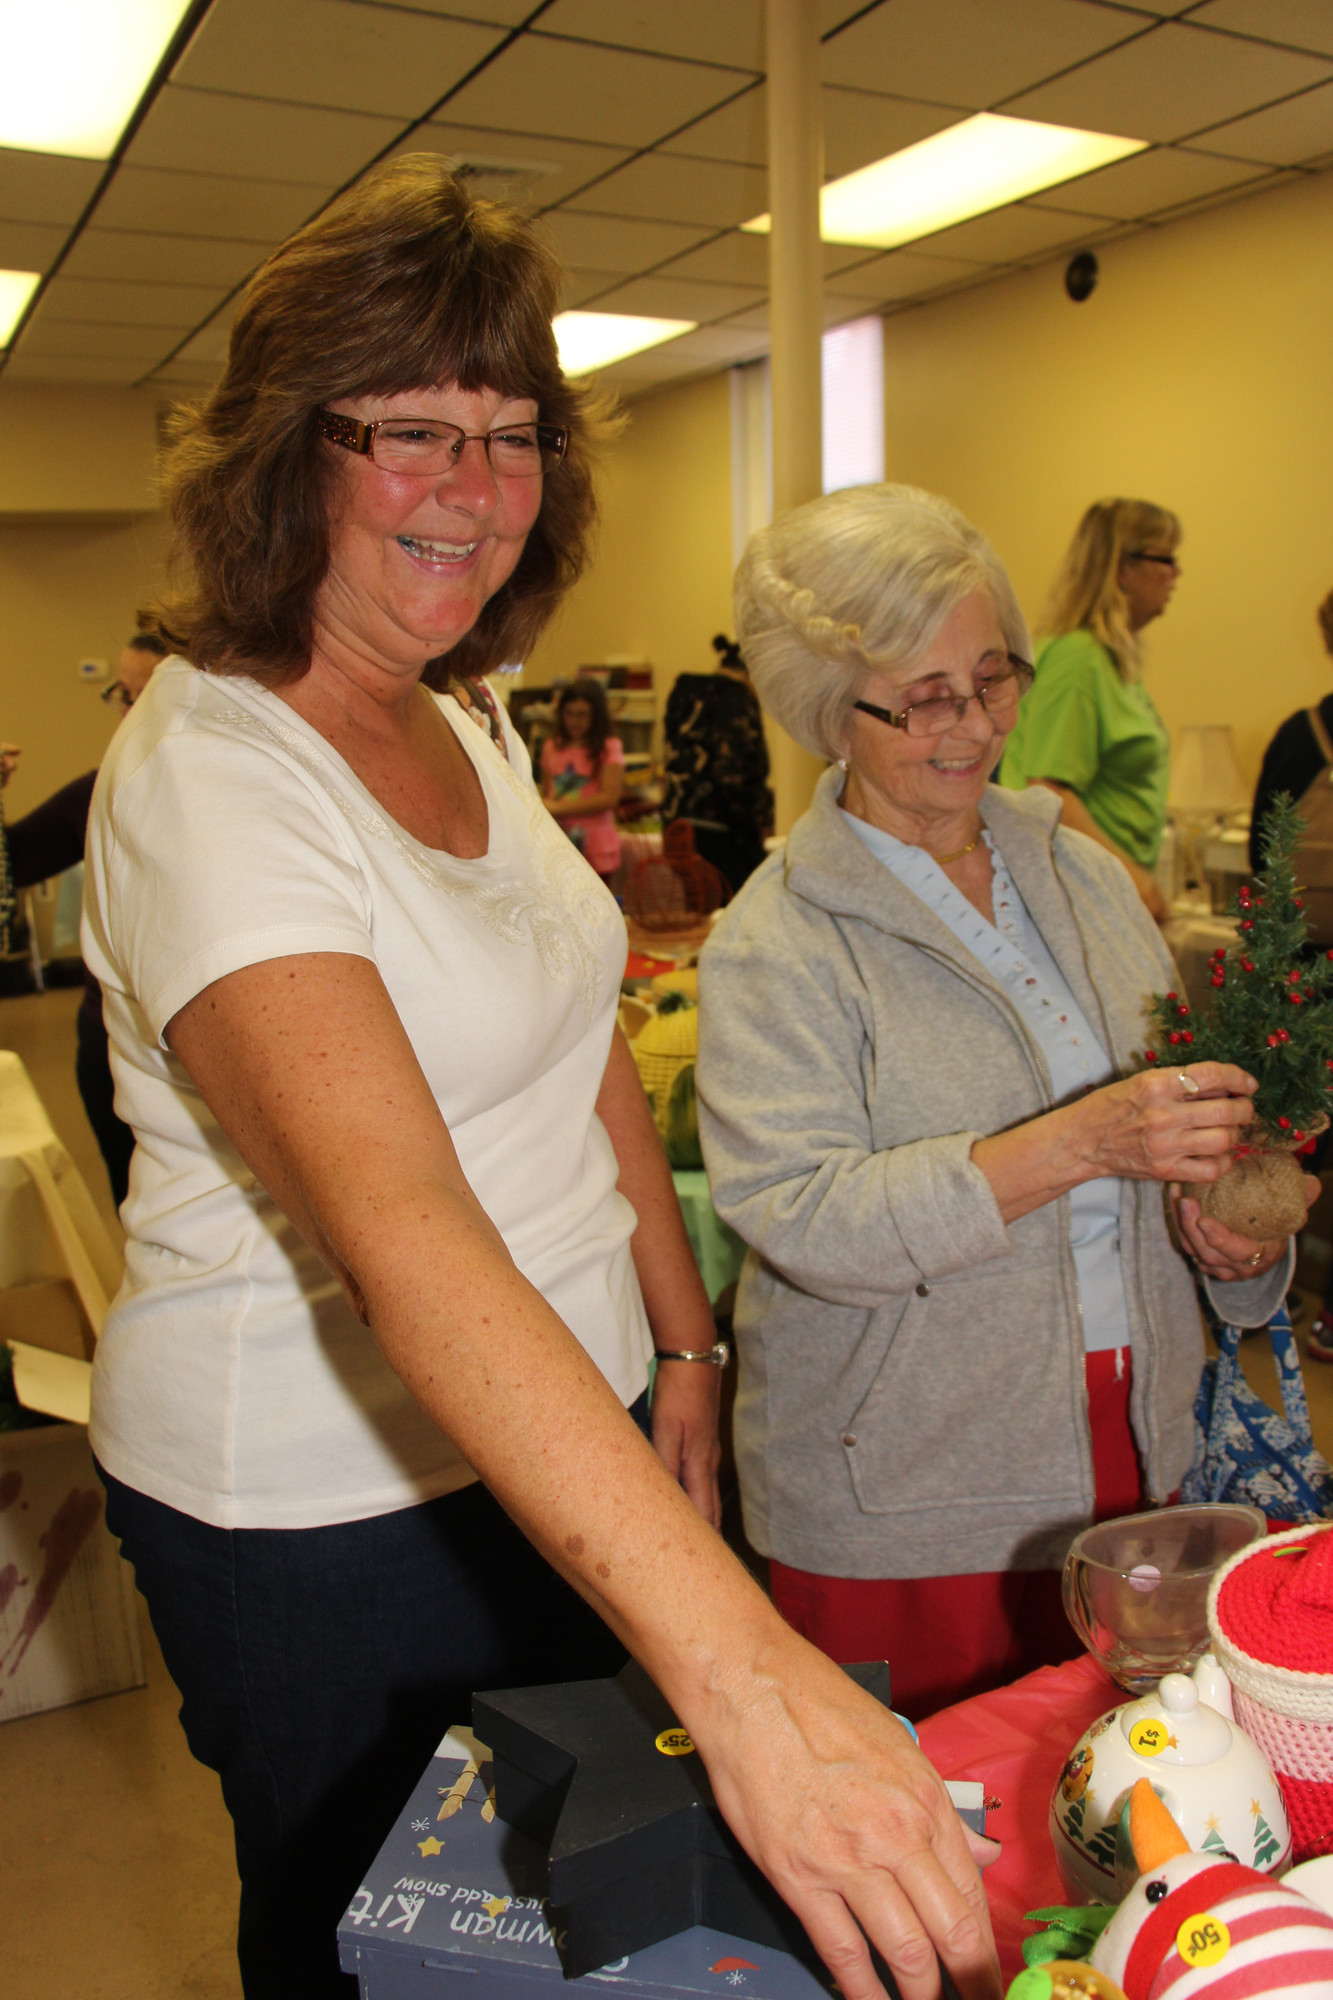 Christine Stephan with her mom Joan Hagner shopped for some holiday gifts and decorations.